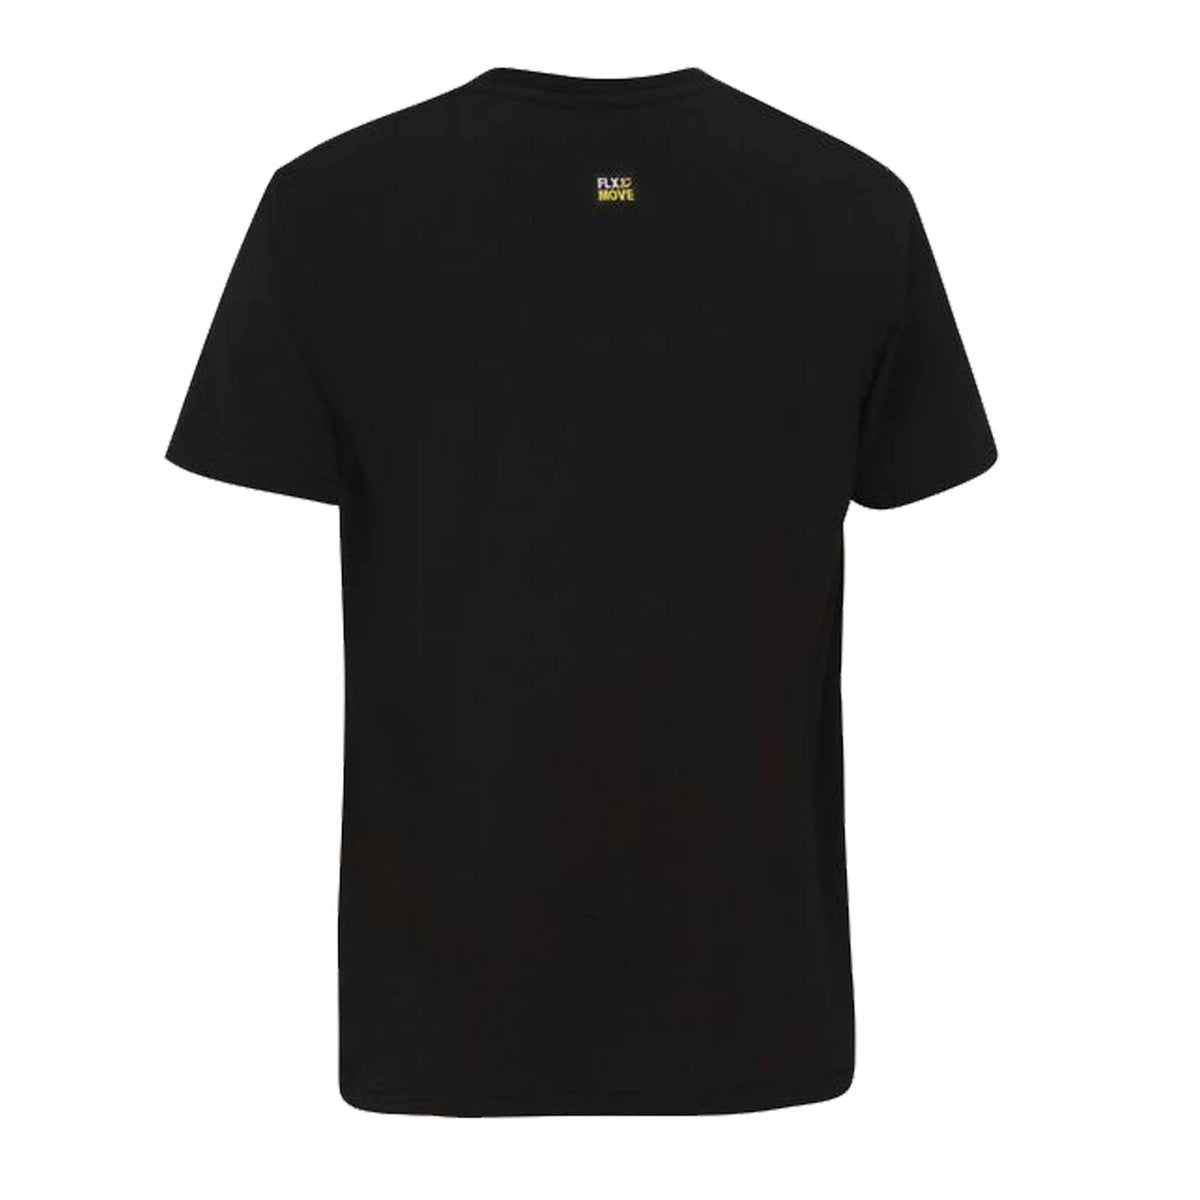 bisley flx and move cotton outline print tee